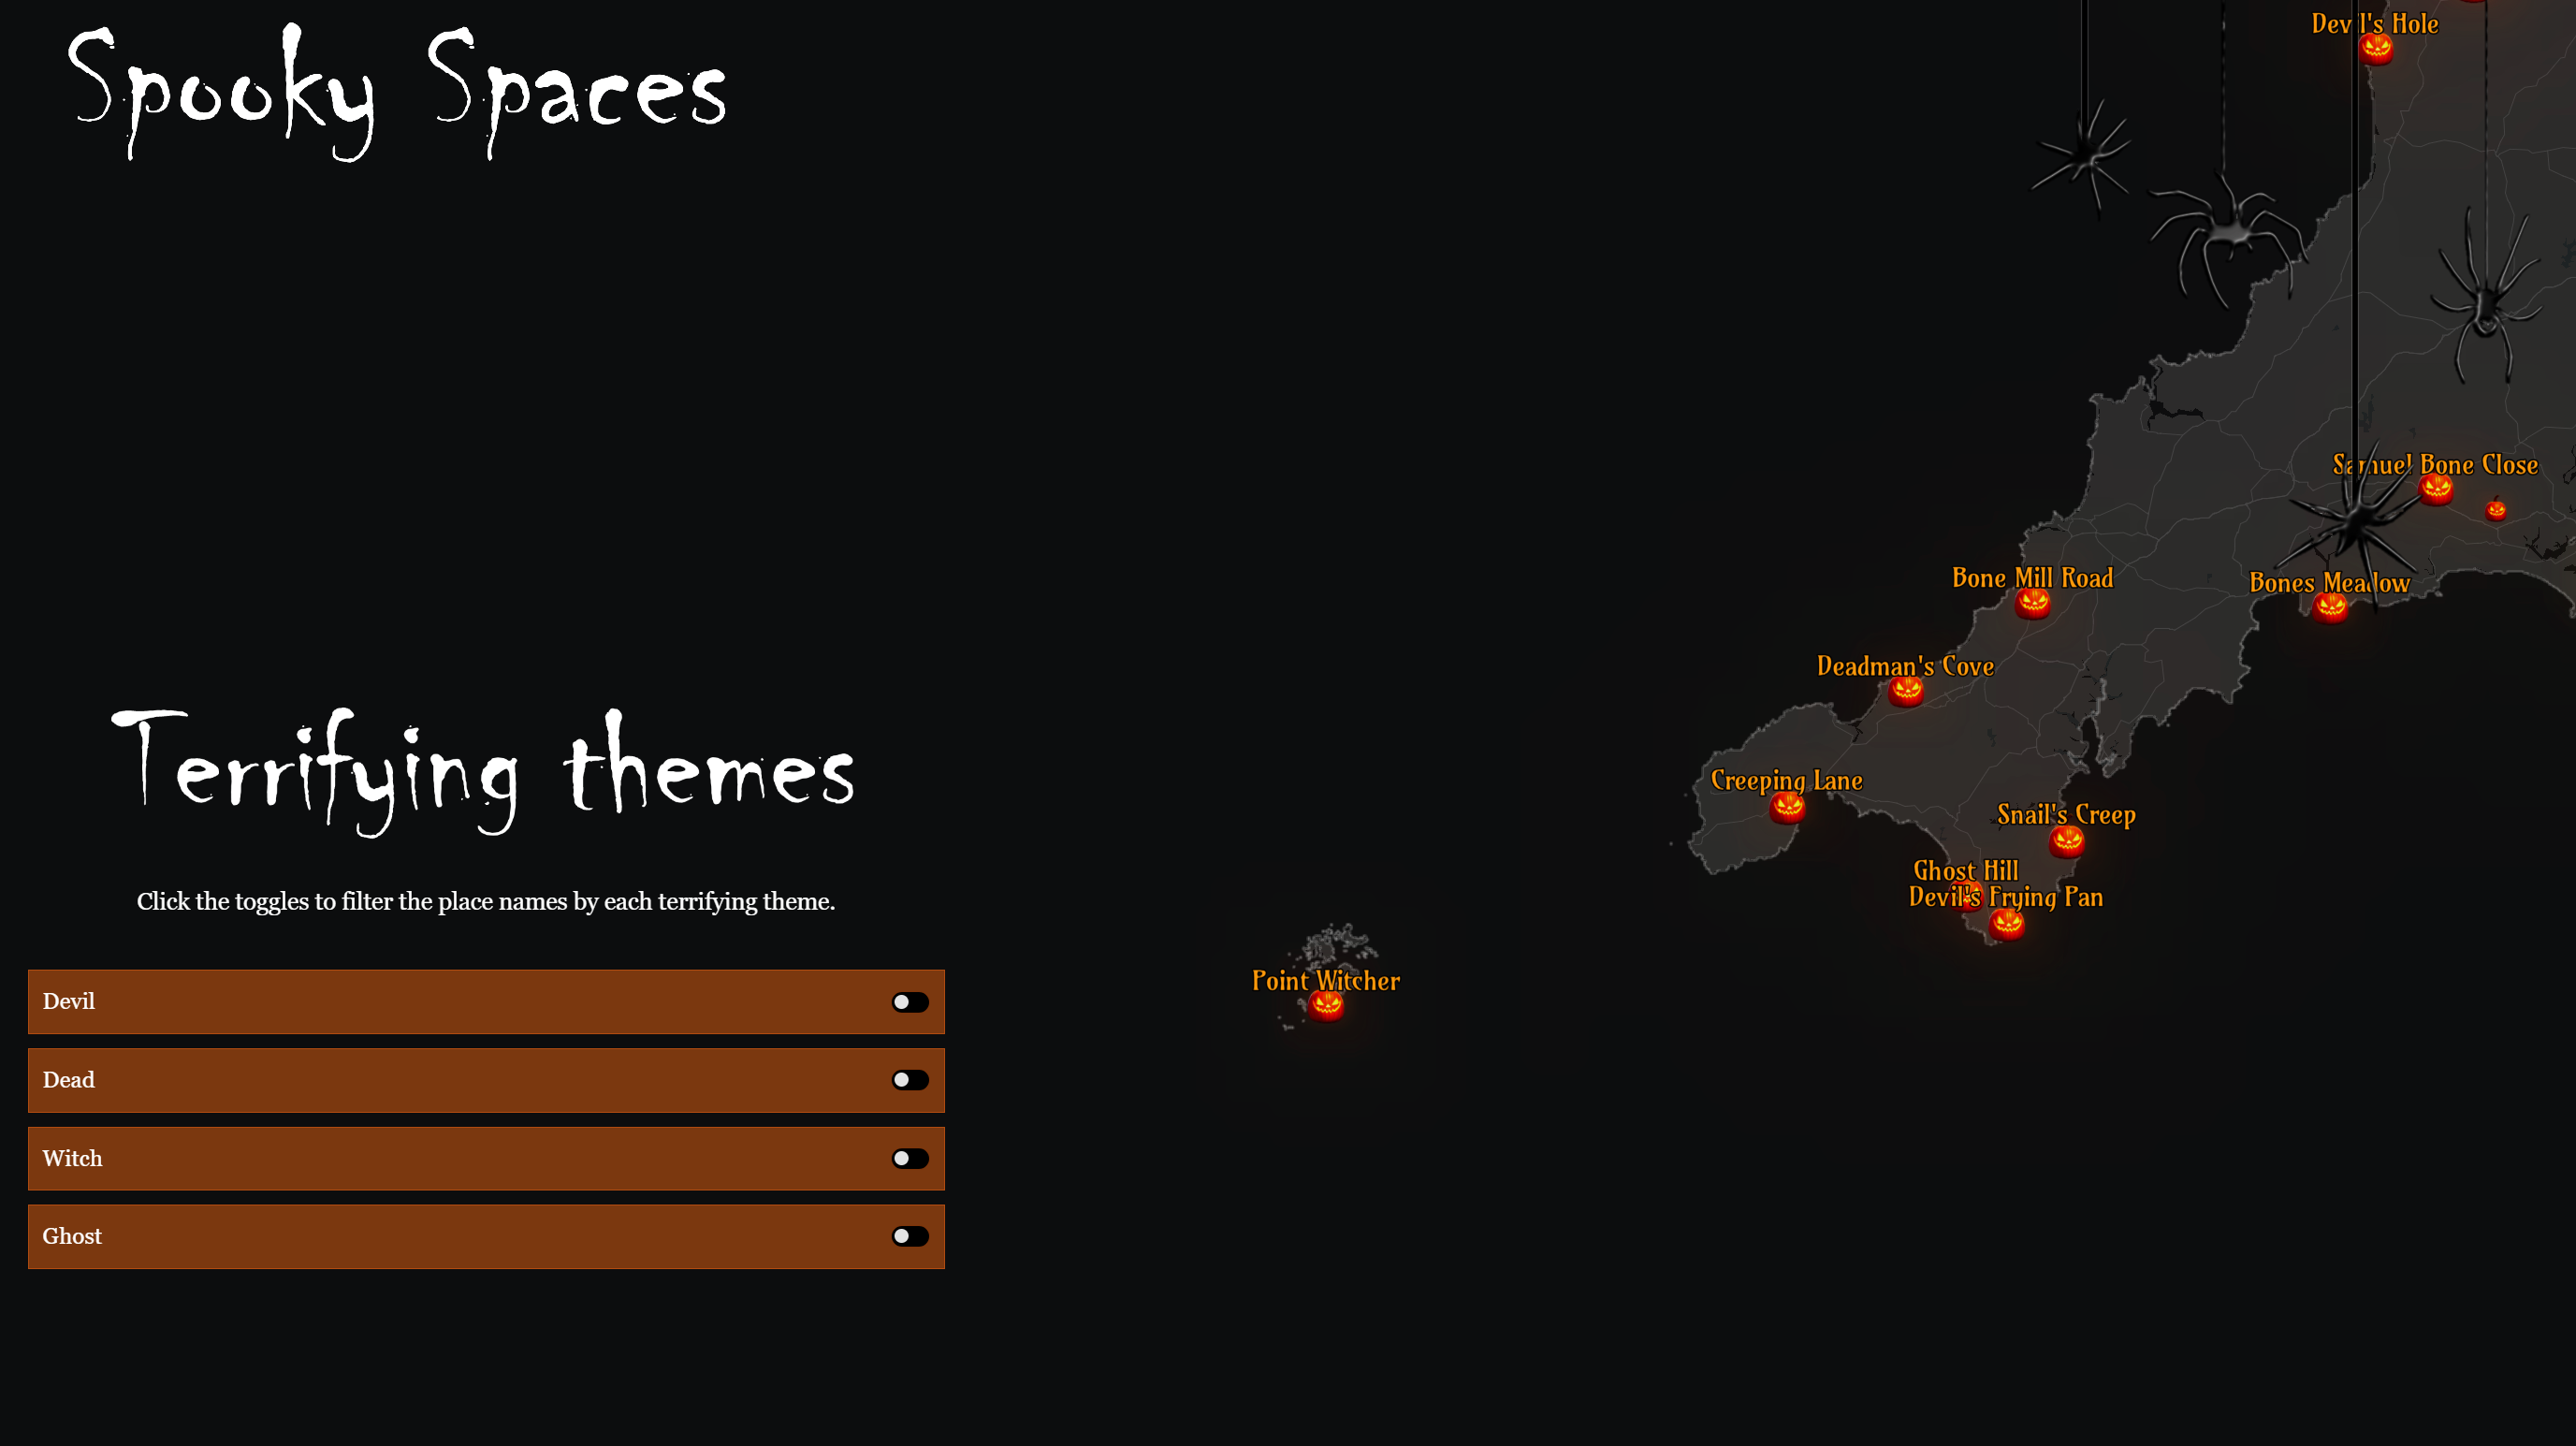 Web experience in ArcGIS Experience Builder. A dark basemap with glowing pumpkins for points, titled "spooky spaces" in white dripping font. 